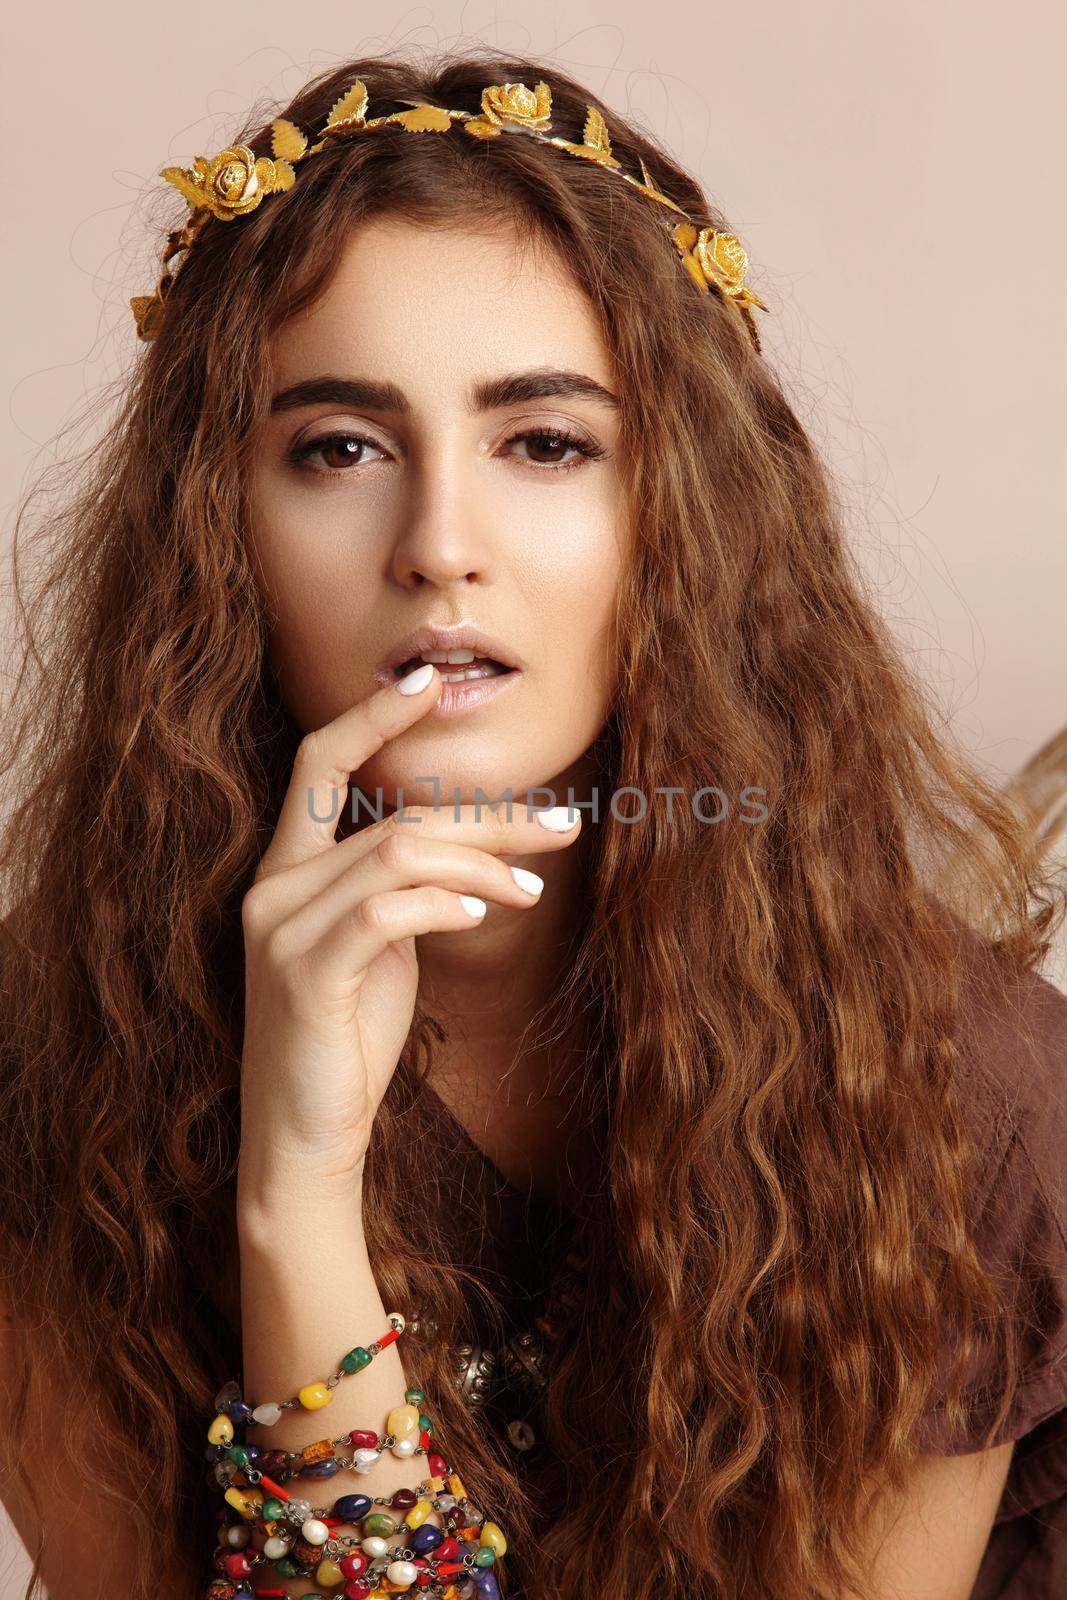 Beautiful Woman. Curly Long Hair. Fashion Model. Healthy Wavy Hairstyle. Accessories. Autumn Wreath, Gold Floral Crown by MarinaFrost